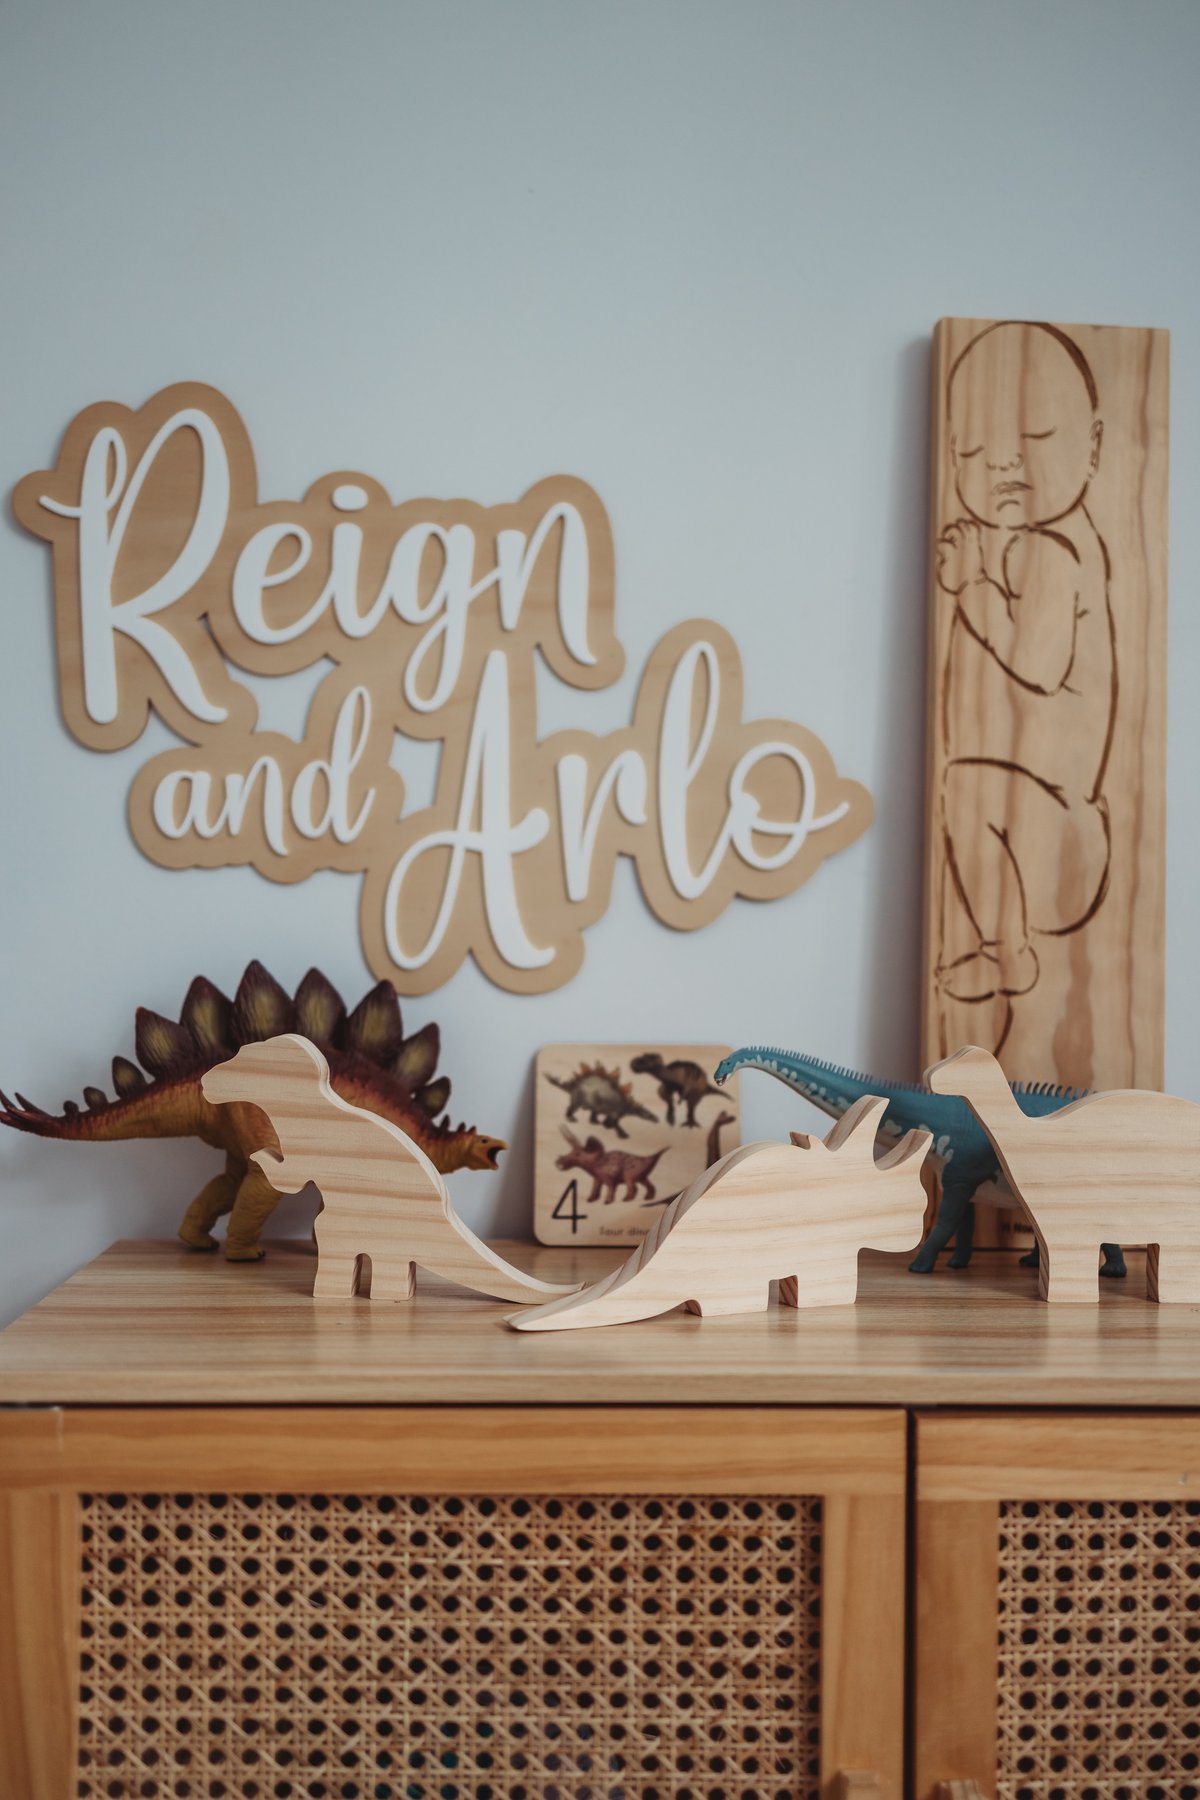 Image of Wooden Dinosaurs